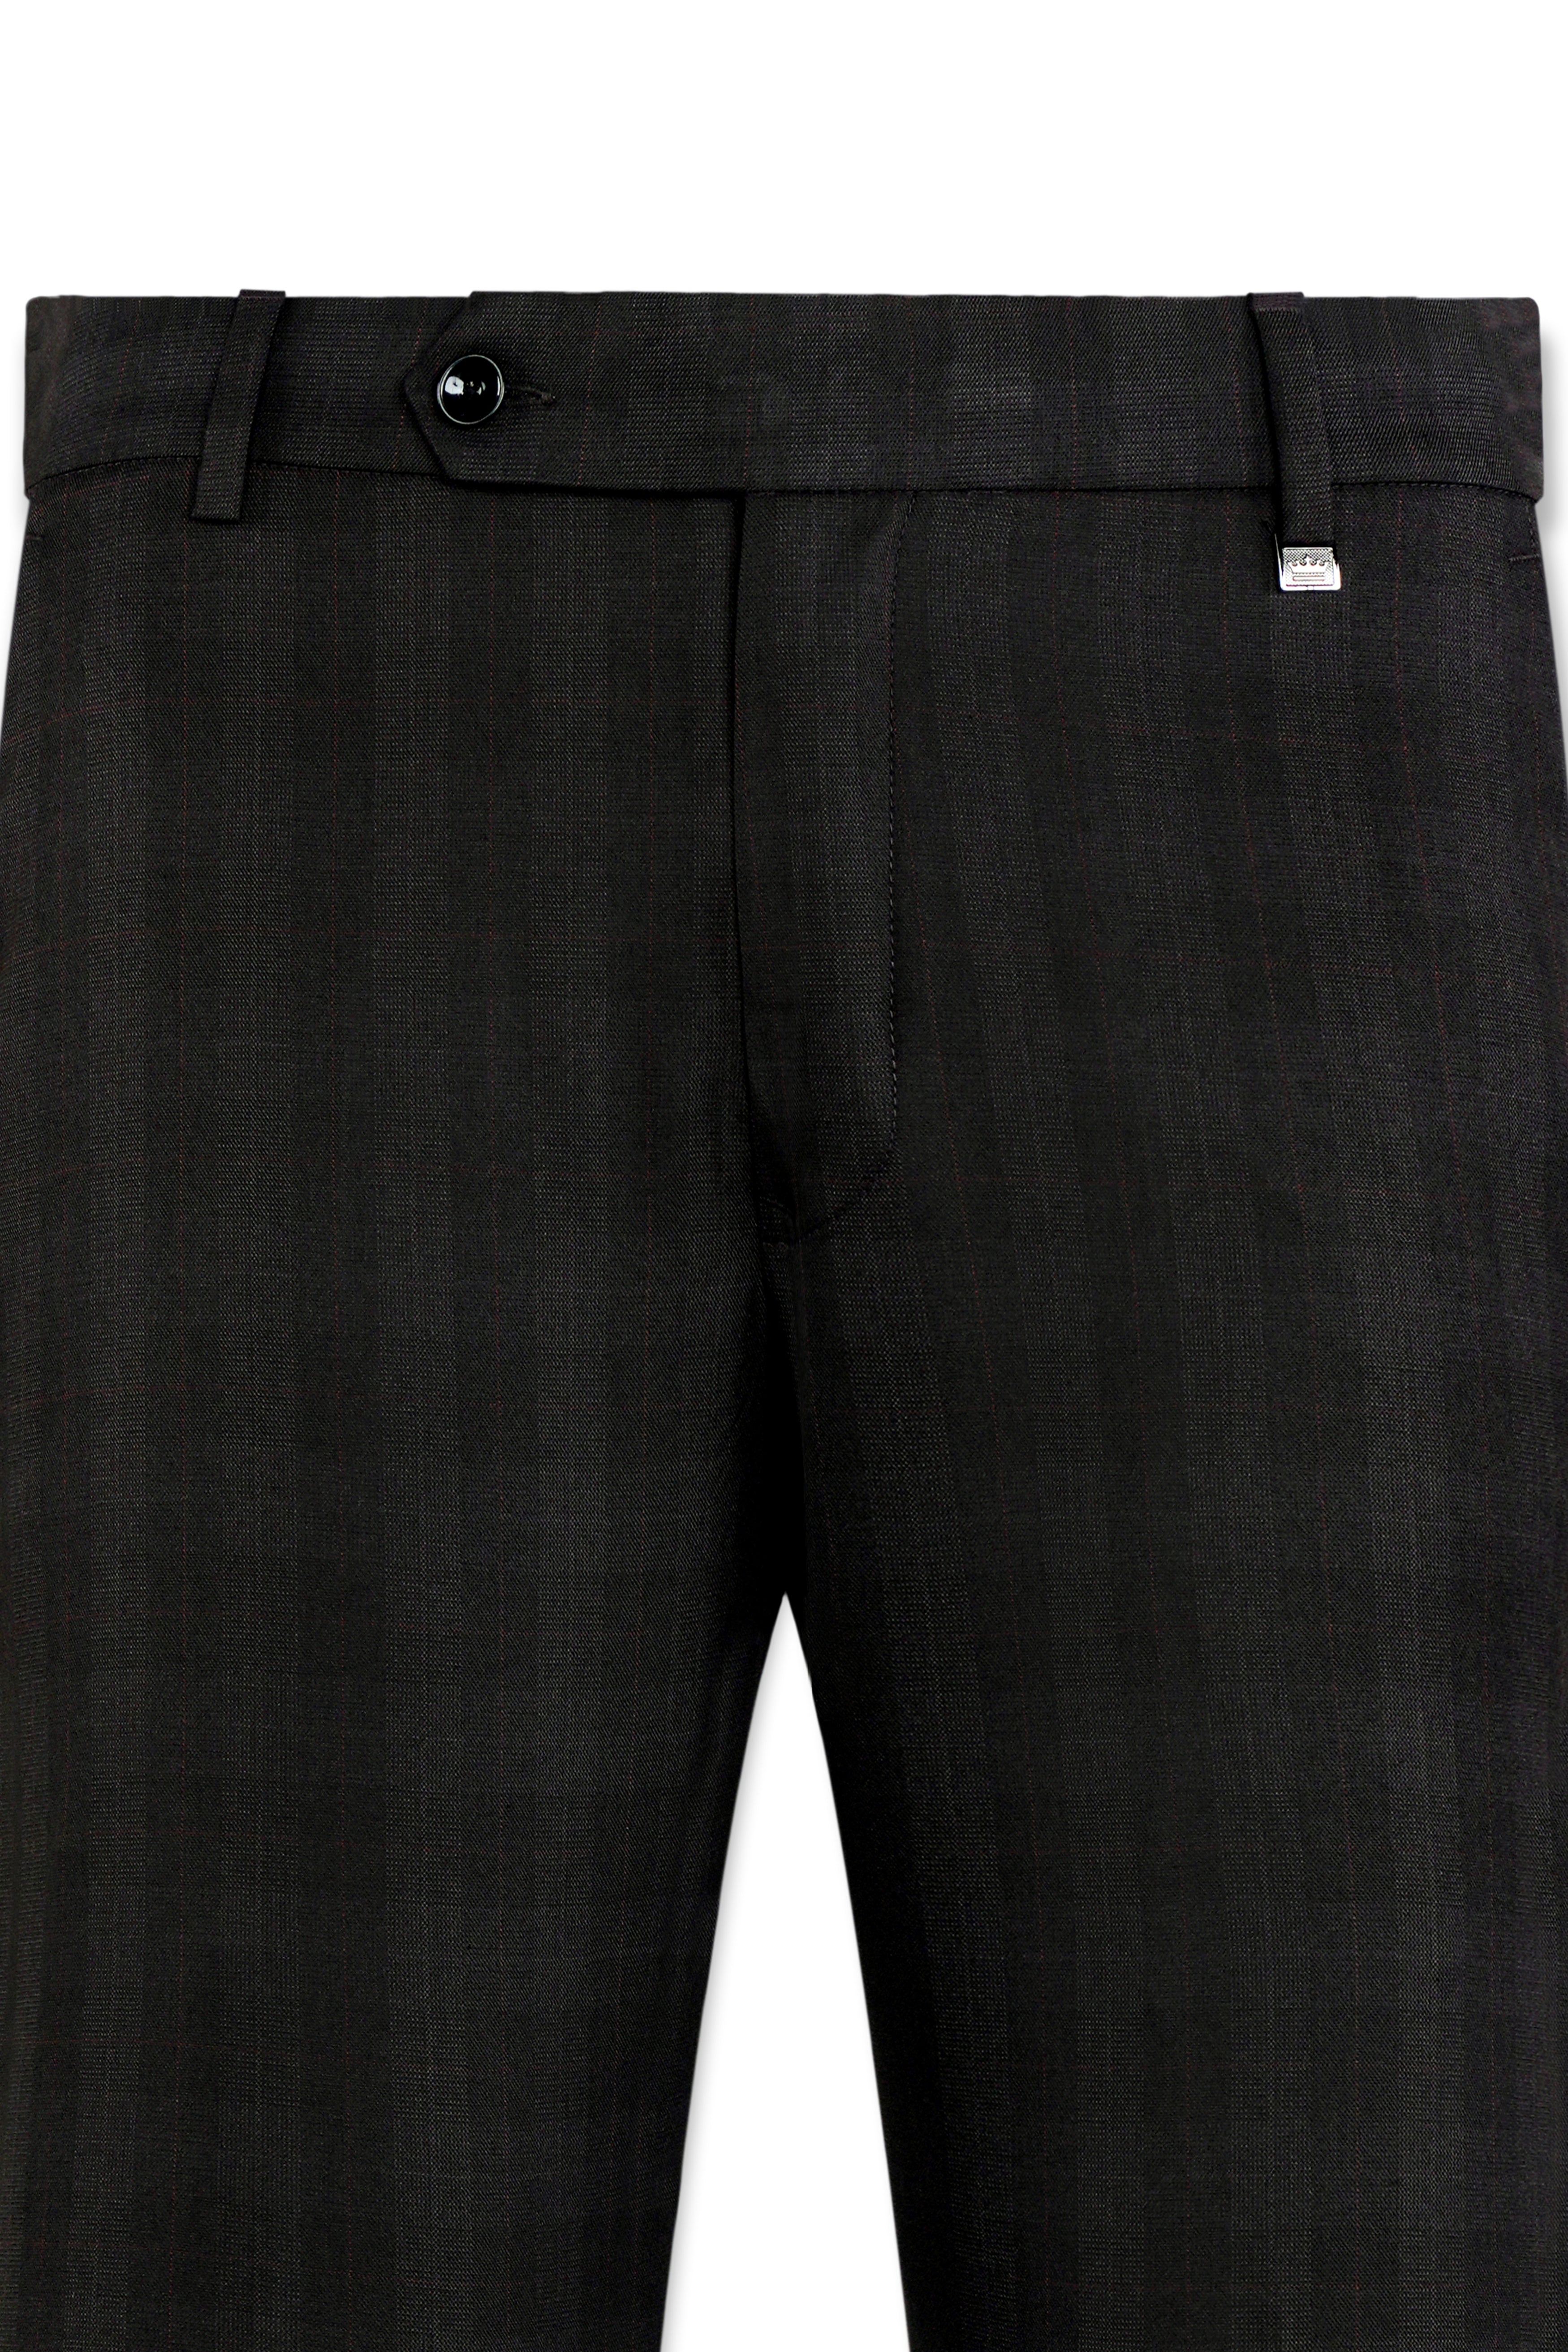 Men Bottom Trousers Boy Woven Check Design Comfotable Basic Pants with  Drawstring - China Pants and Woven Men Pants price | Made-in-China.com